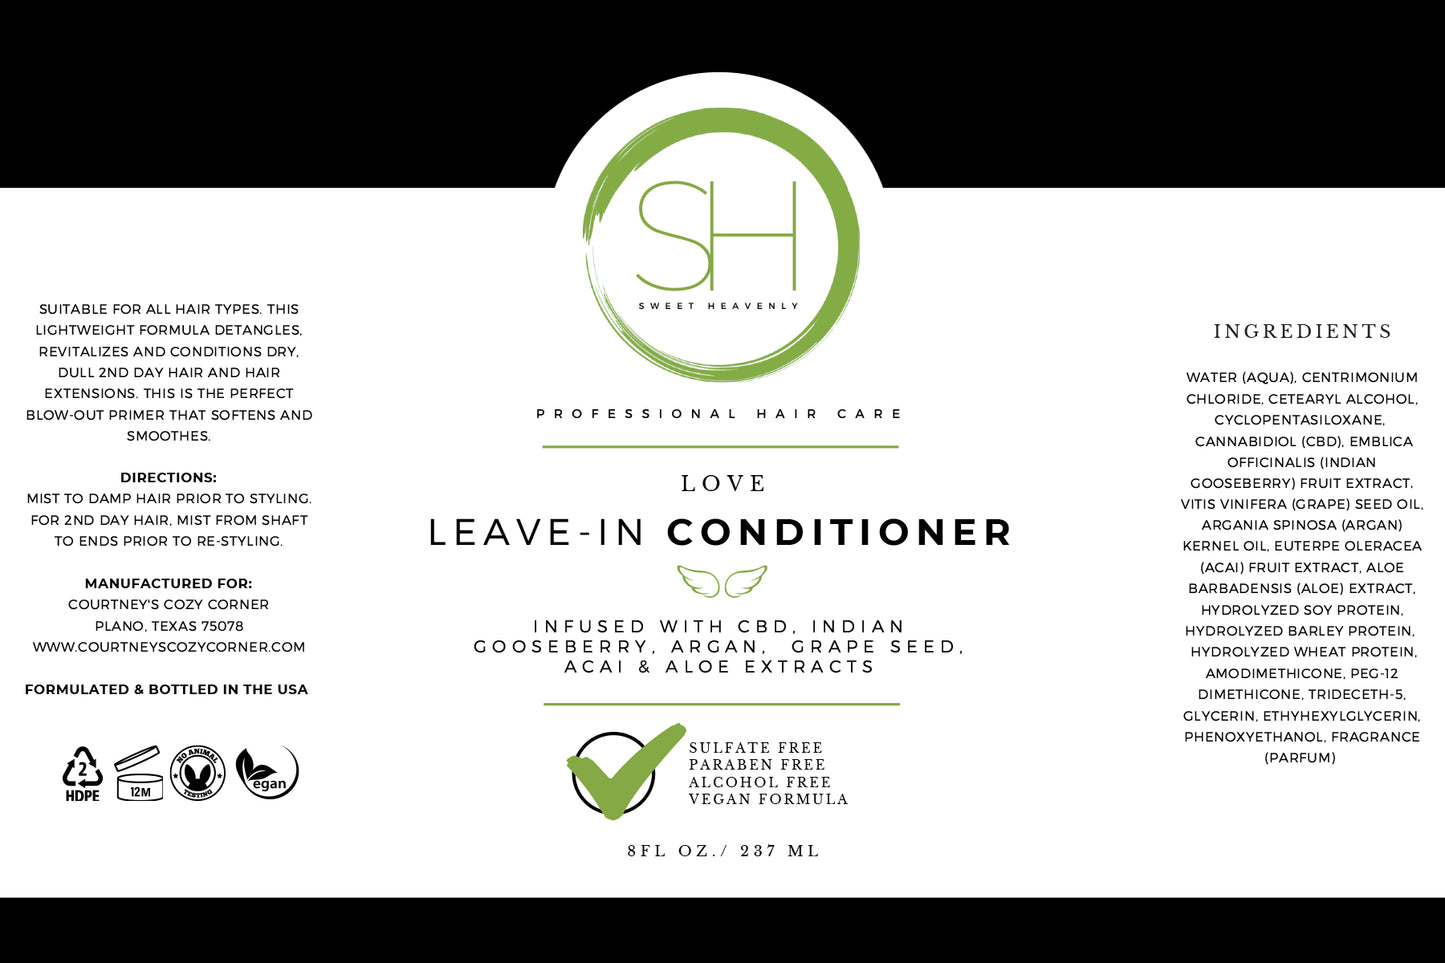 Love Leave-In Conditioner